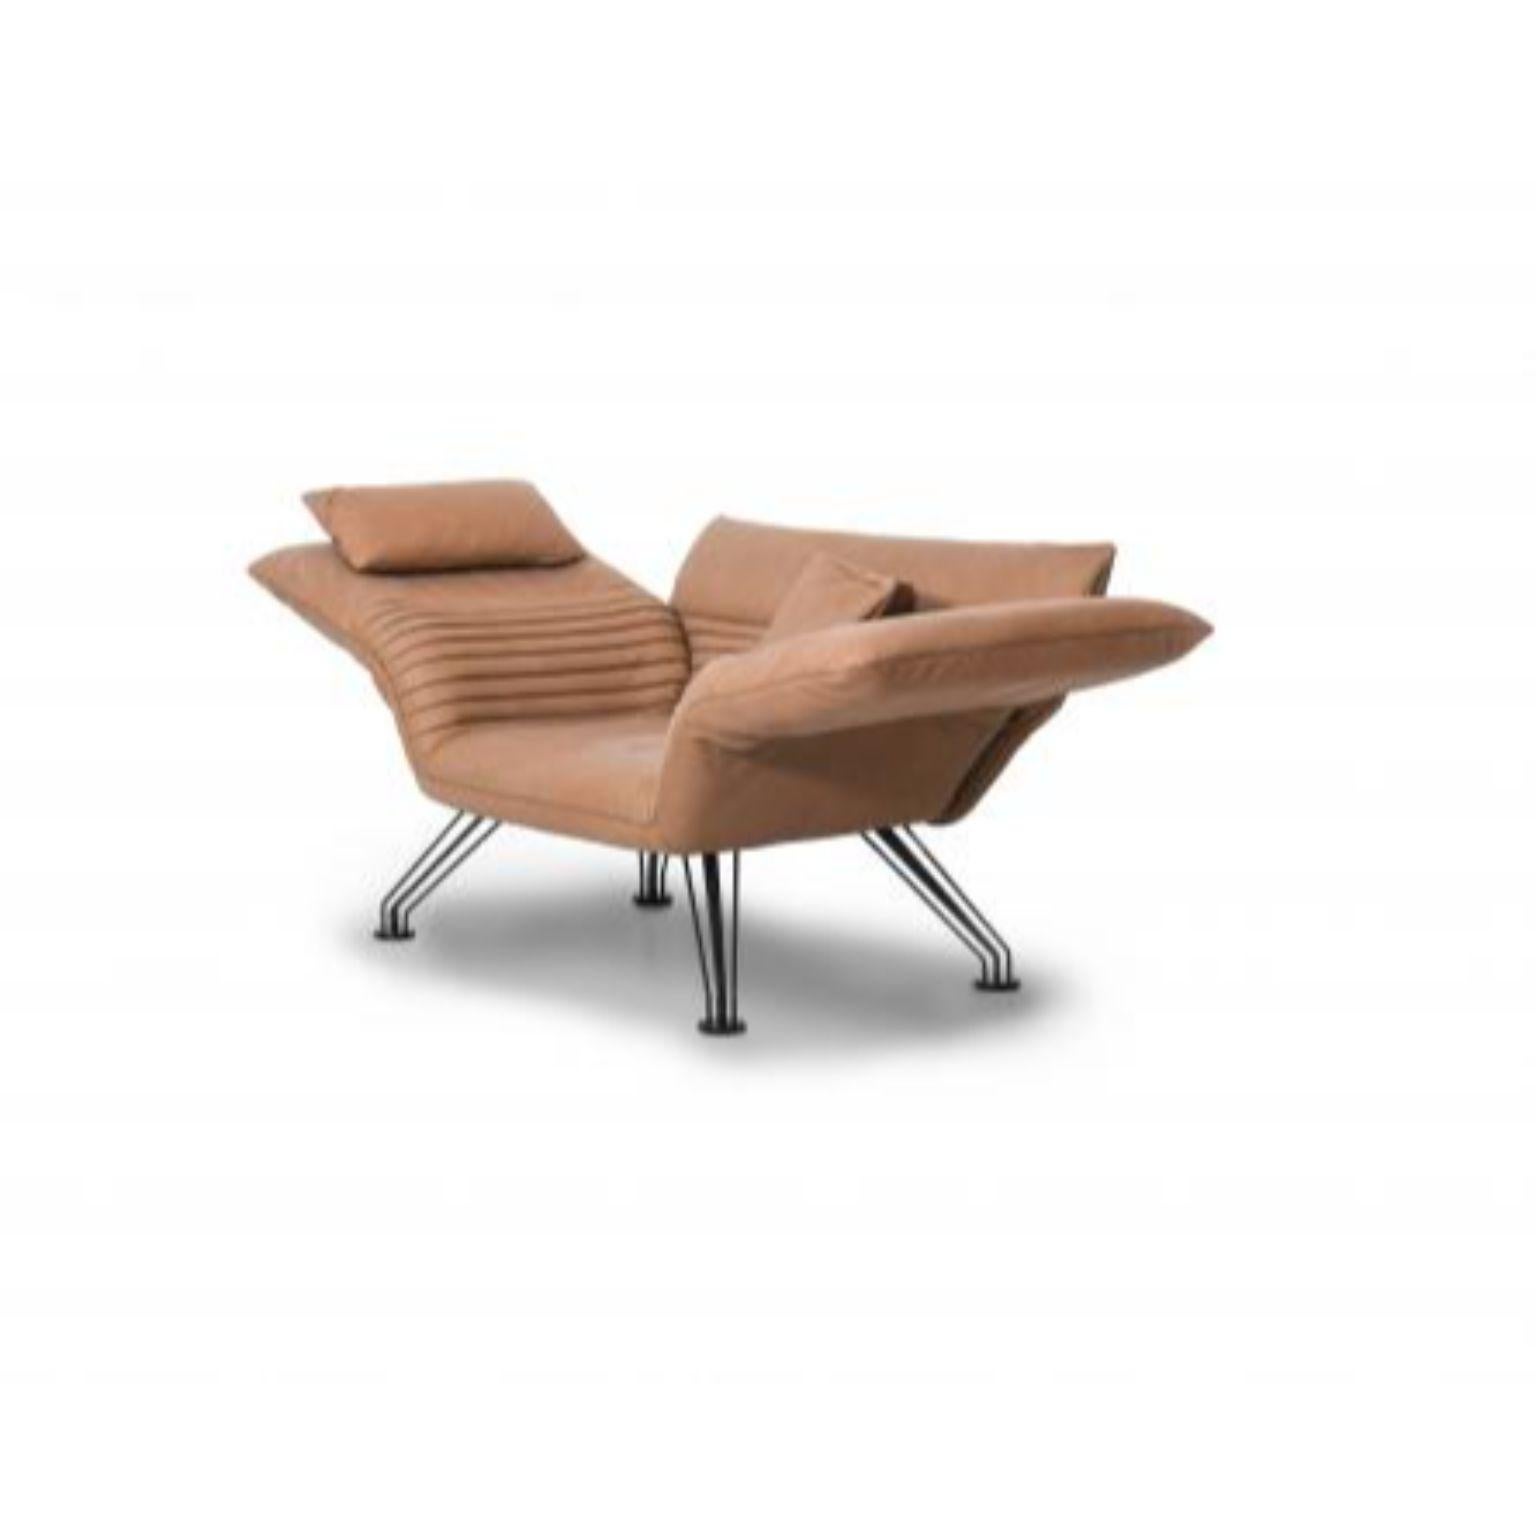 DS-142 multifunctional lounge chair by De Sede
Designer: Winfried Totzek
Dimensions: D 82-98 x W 160-198 x H 56-97 cm
Materials: Black metal feet, 5-spoke base, leather

A place to sit or lie down upon, every time 
 
A piece of furniture that